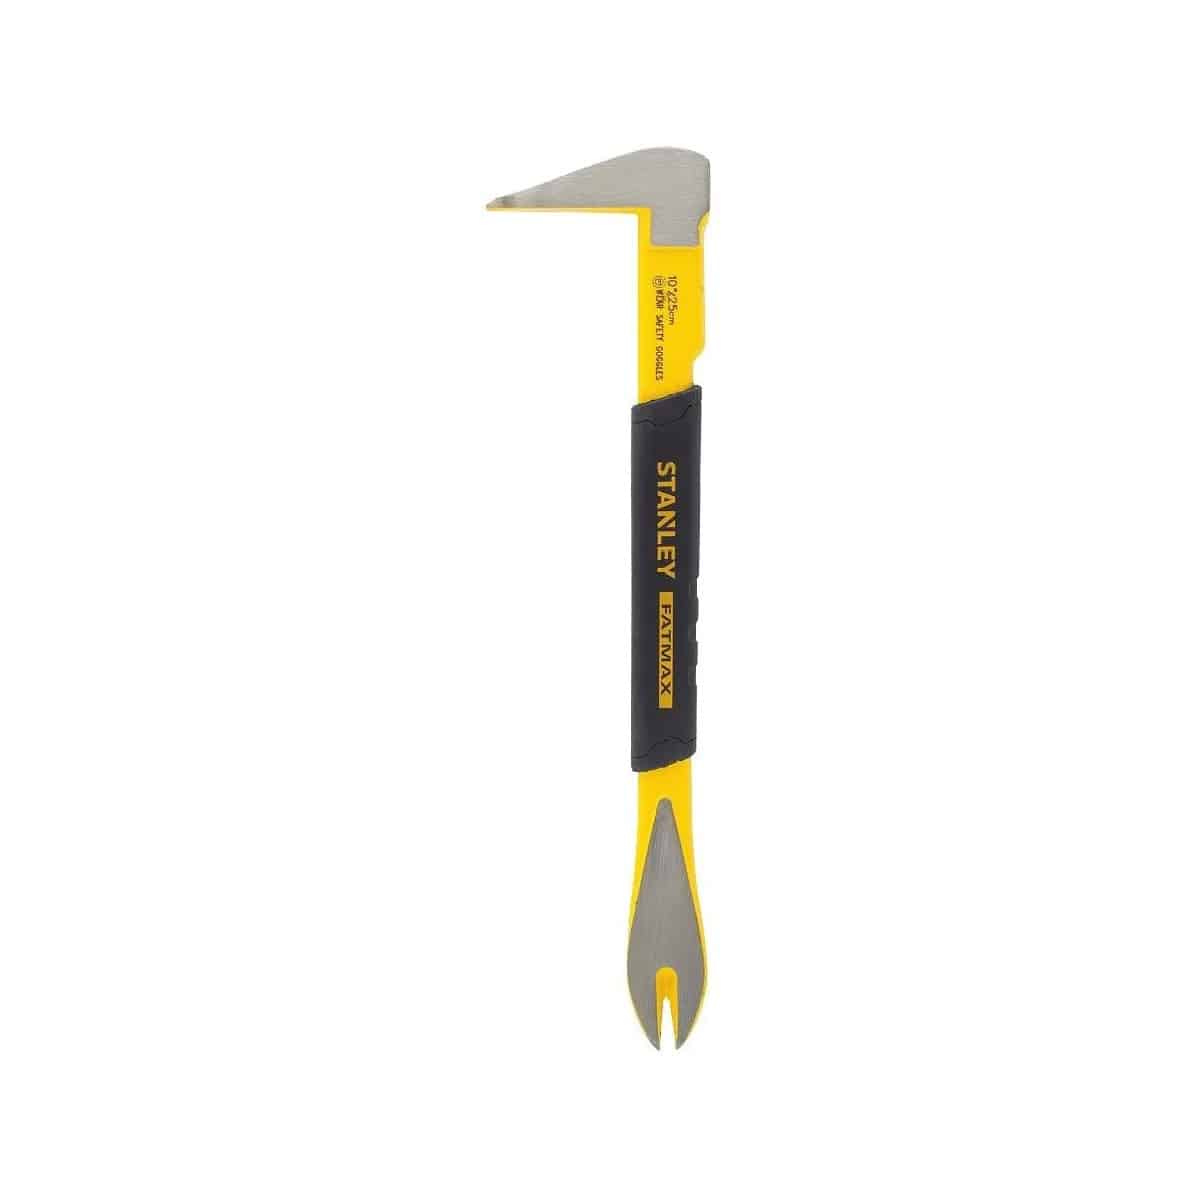 Stanley FatMax Pry Bar Nail Puller